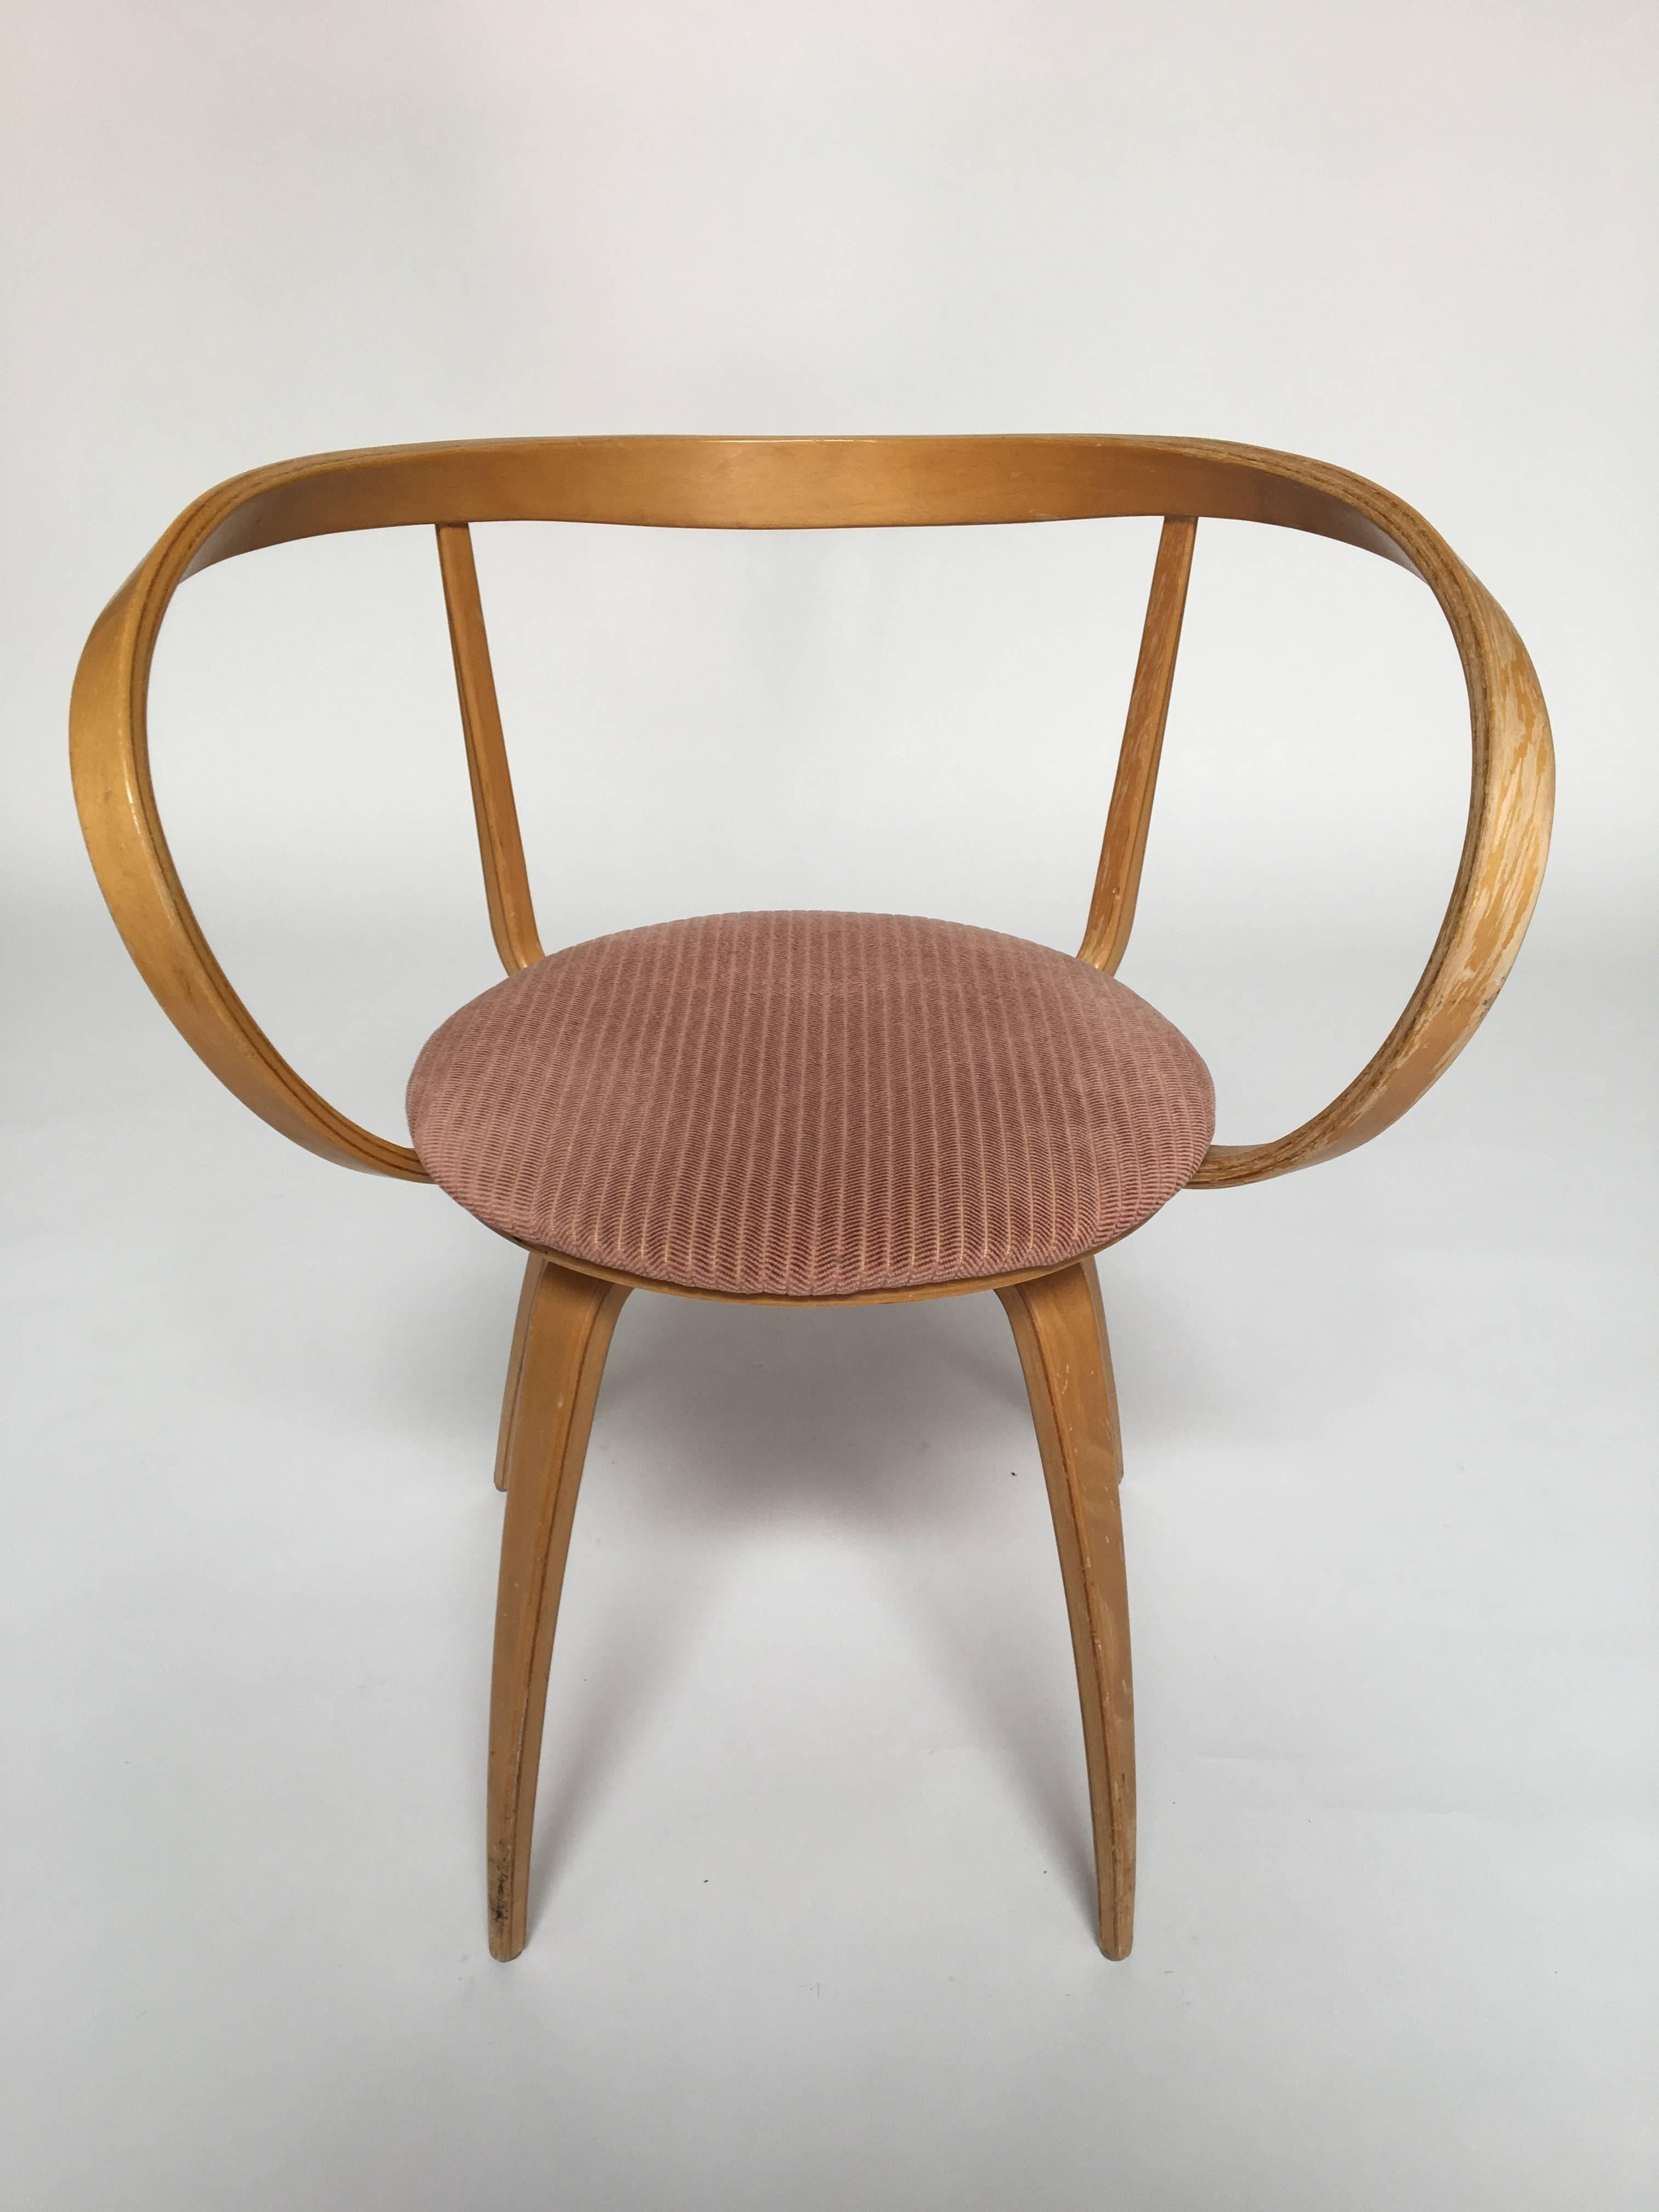 Rare pretzel chair in great vintage condition
some wear on arms but no major flaws
very unique and stunning design.
    